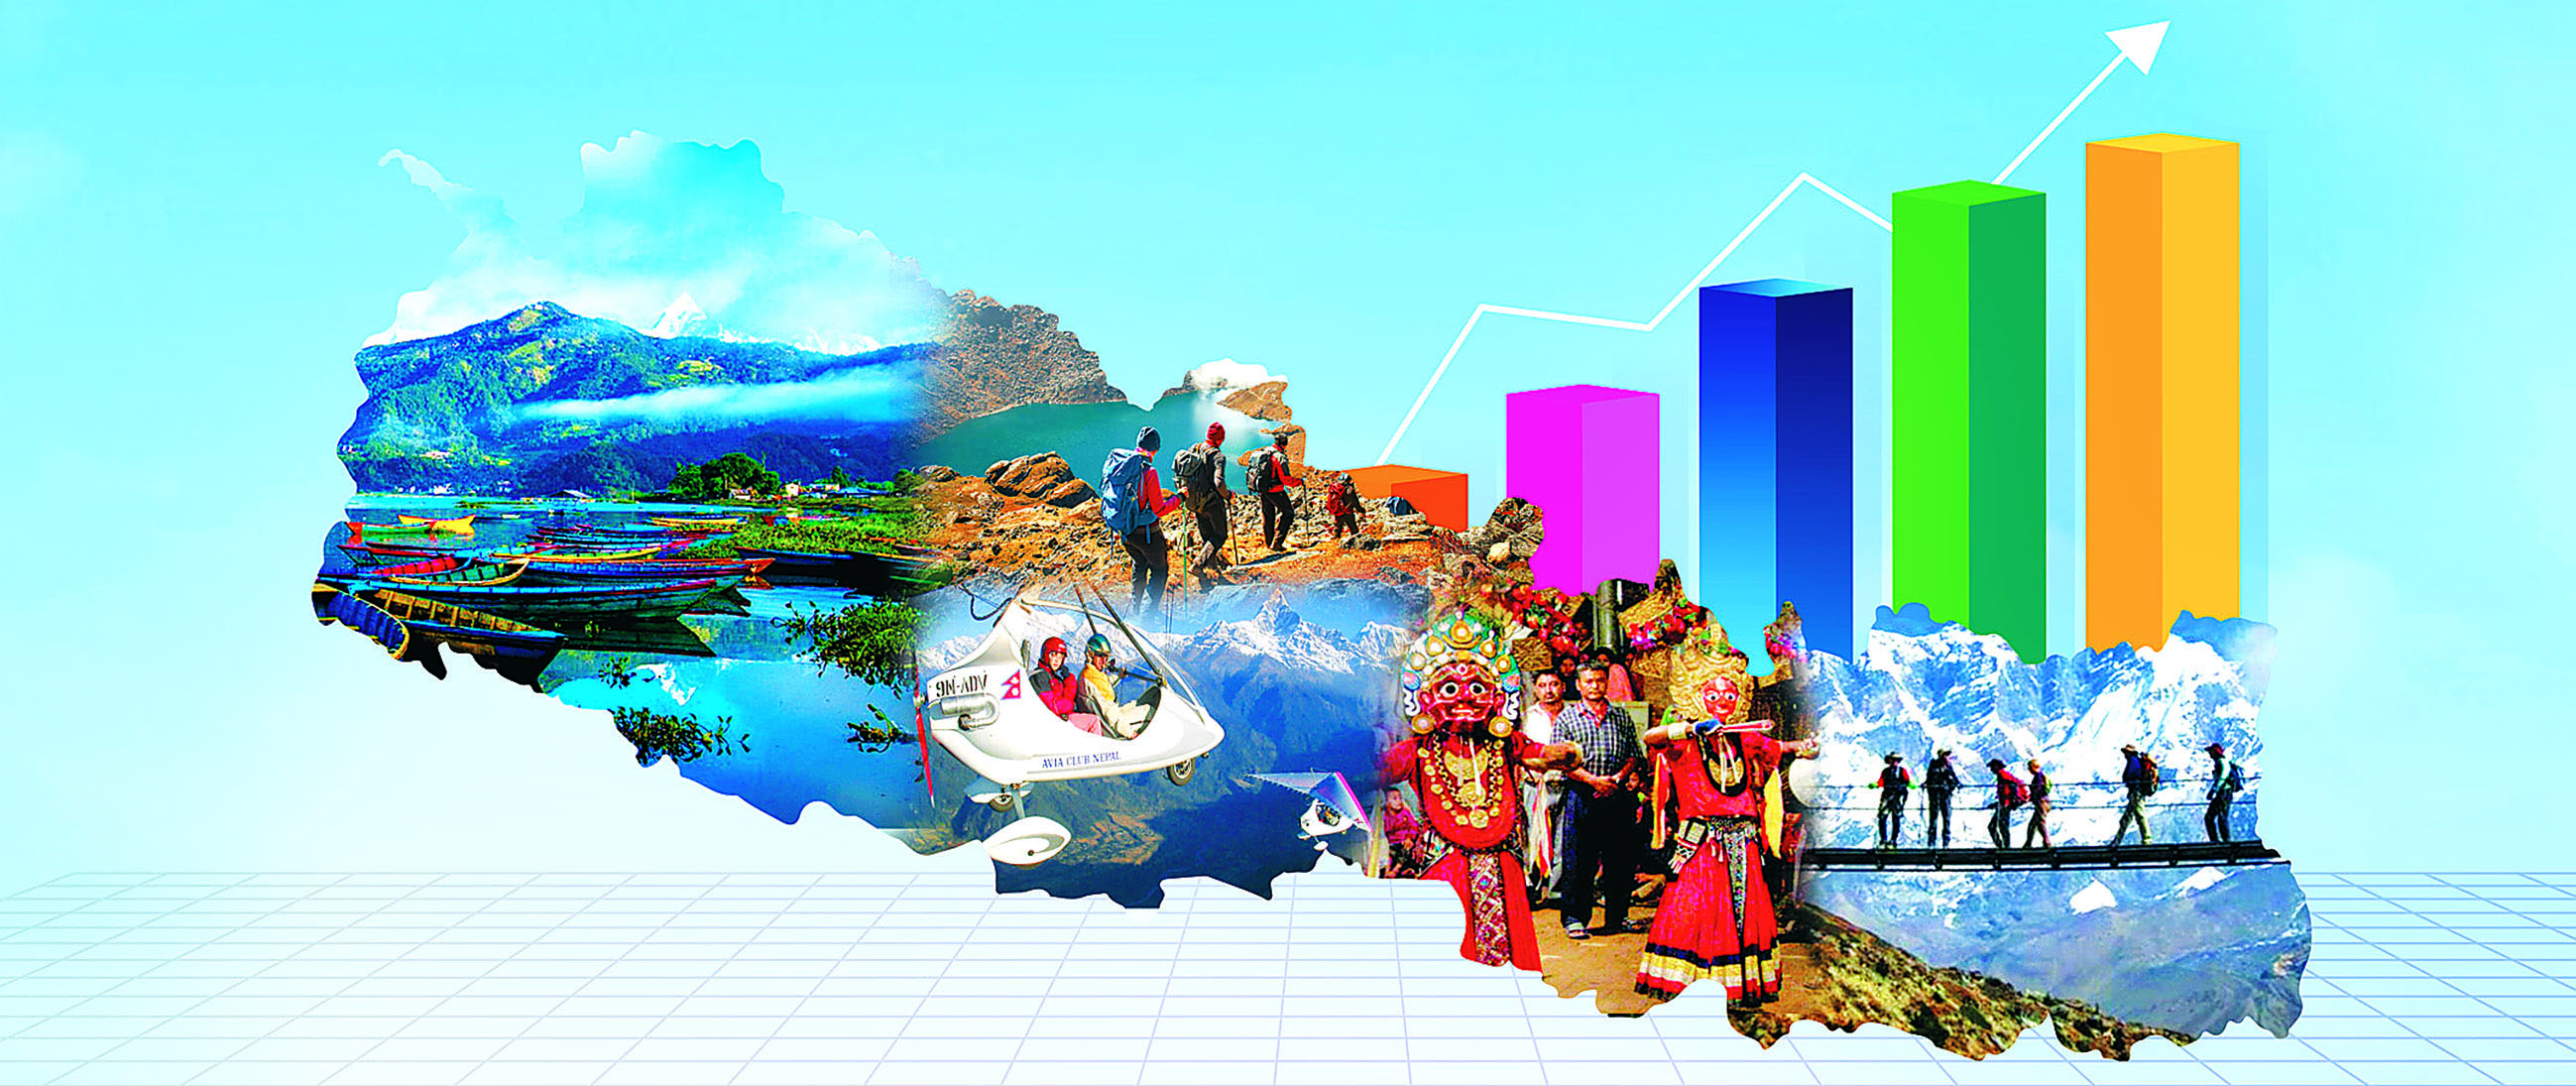 Tourism is Nepal’s fourth largest industry by employment, analytical